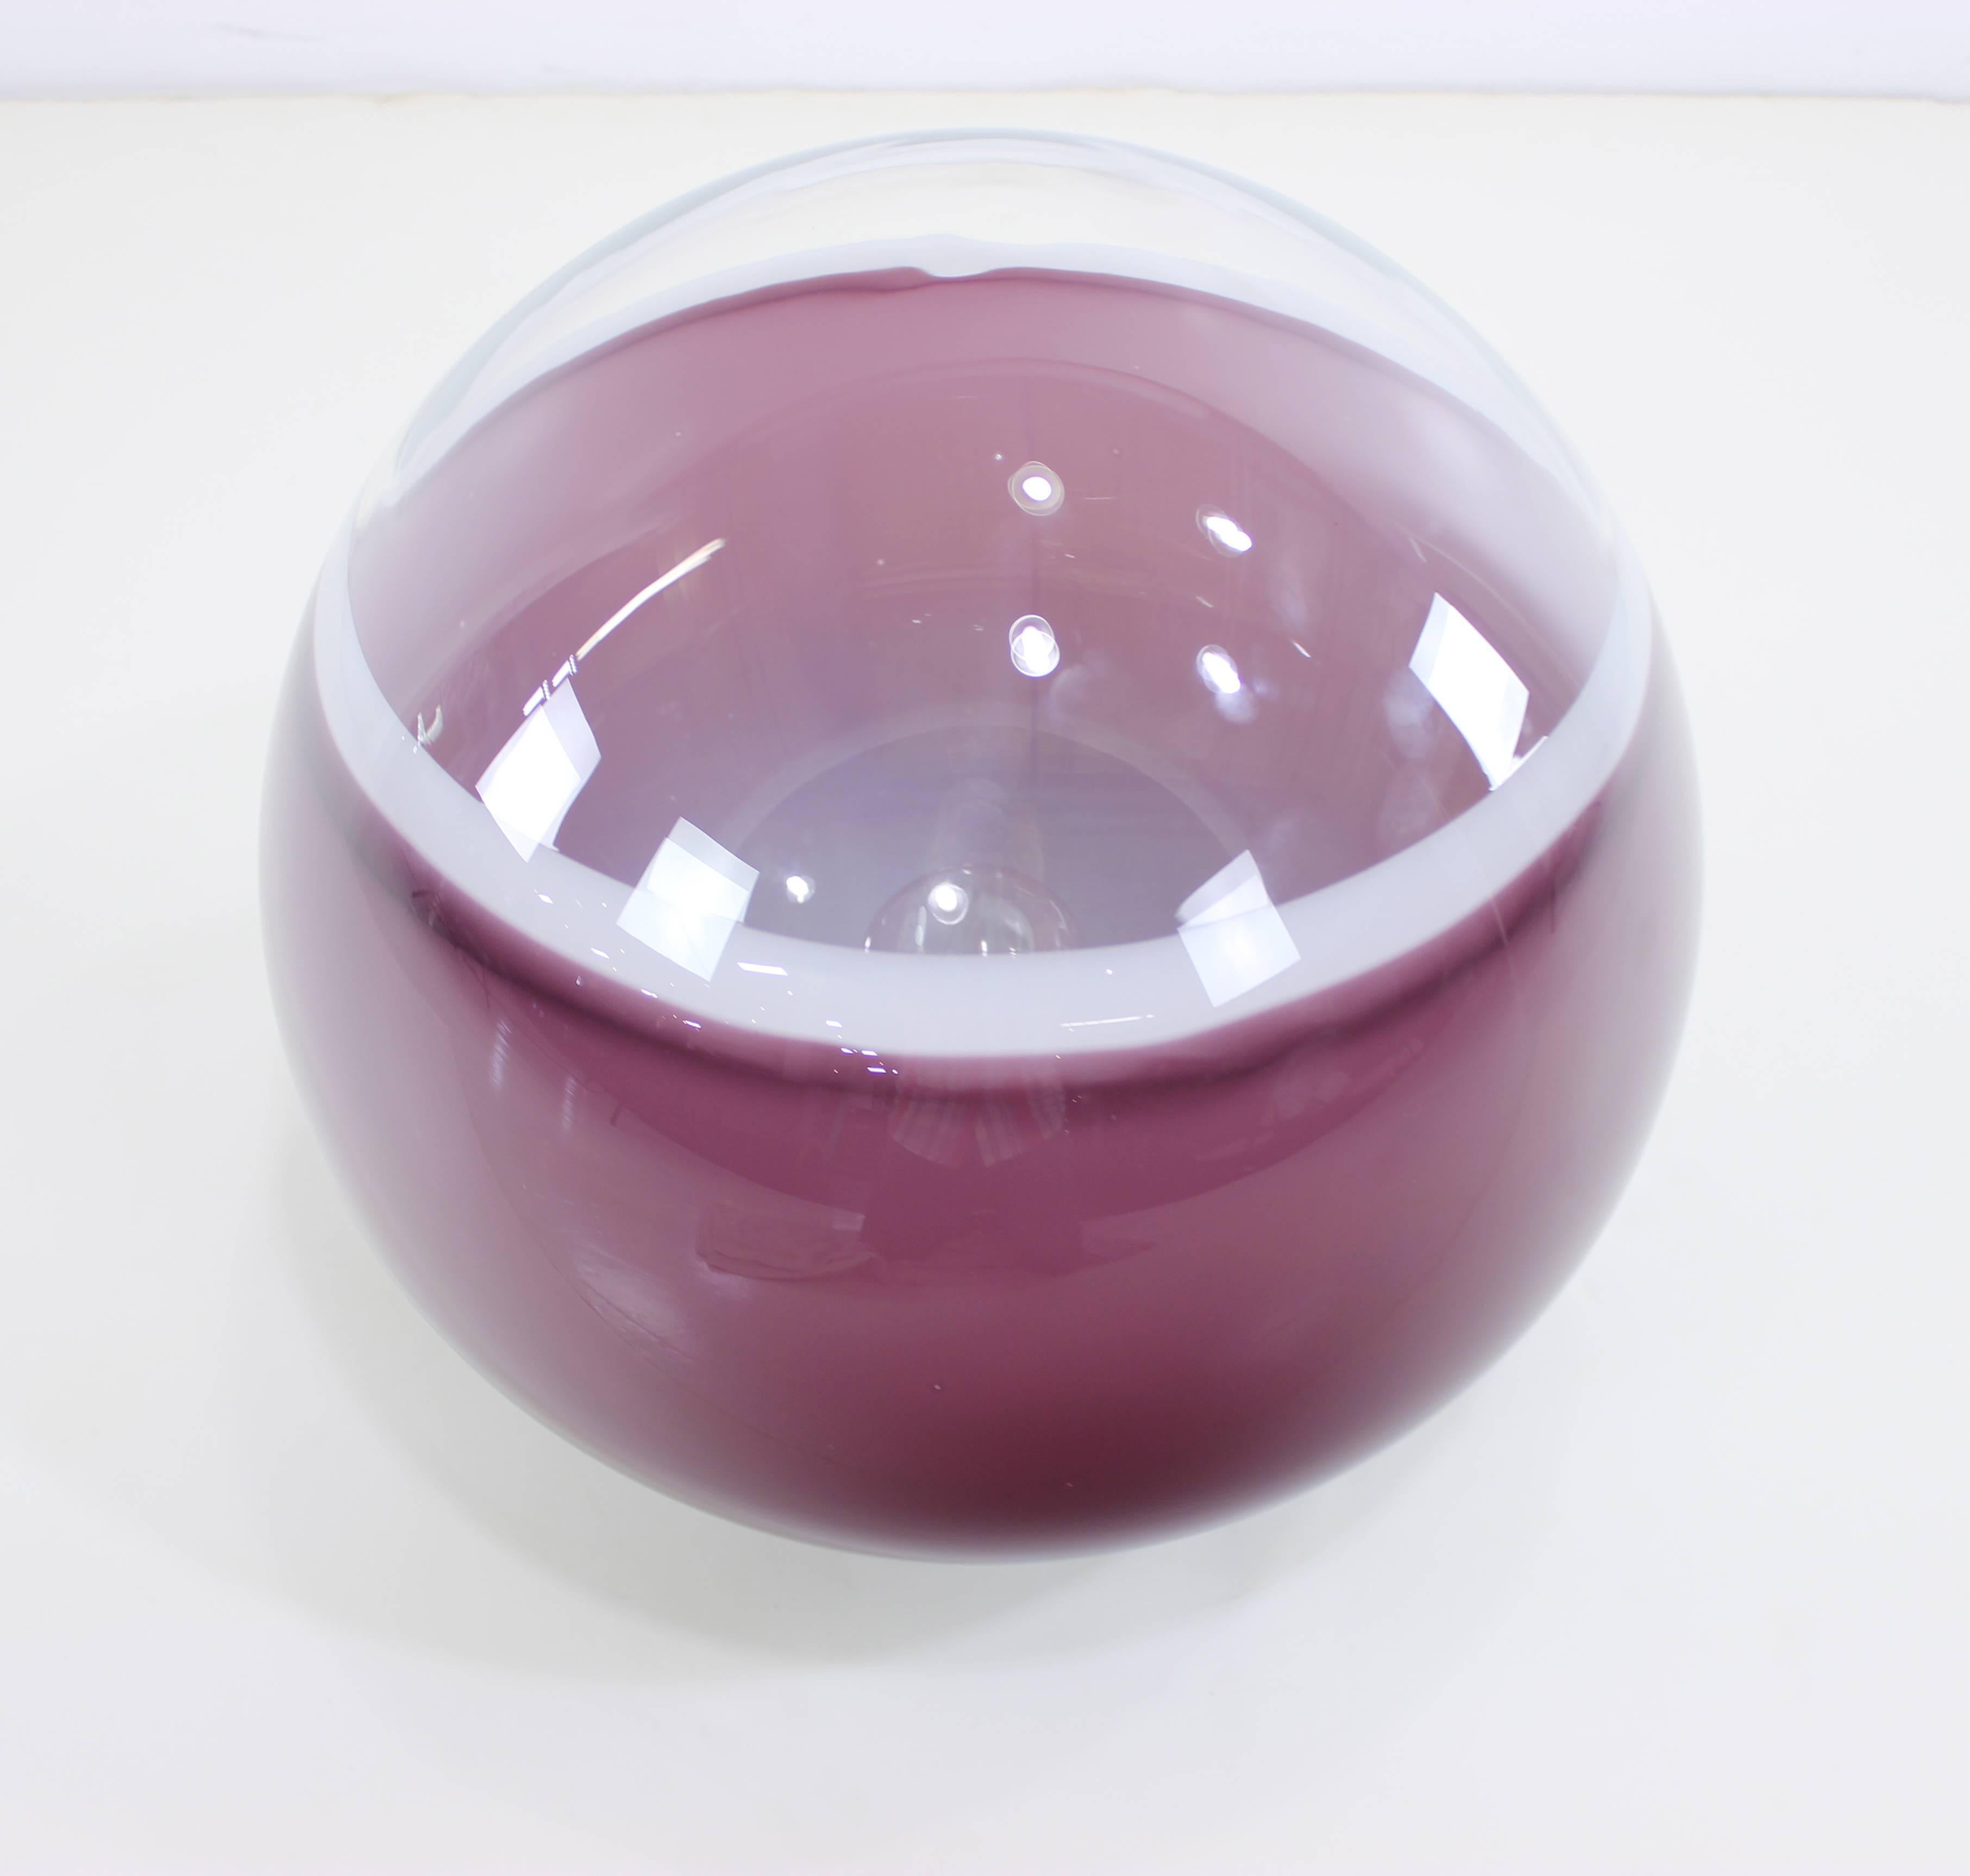 Rare Murano glass lamp by Alfredo Barbini.
Handblown glass with impressive 18" diameter.
Lush mauve color with rich, ambient glow.
Brushed aluminum base.
Accommodates one medium base bulb.
Matchless quality and price.
Low freight and